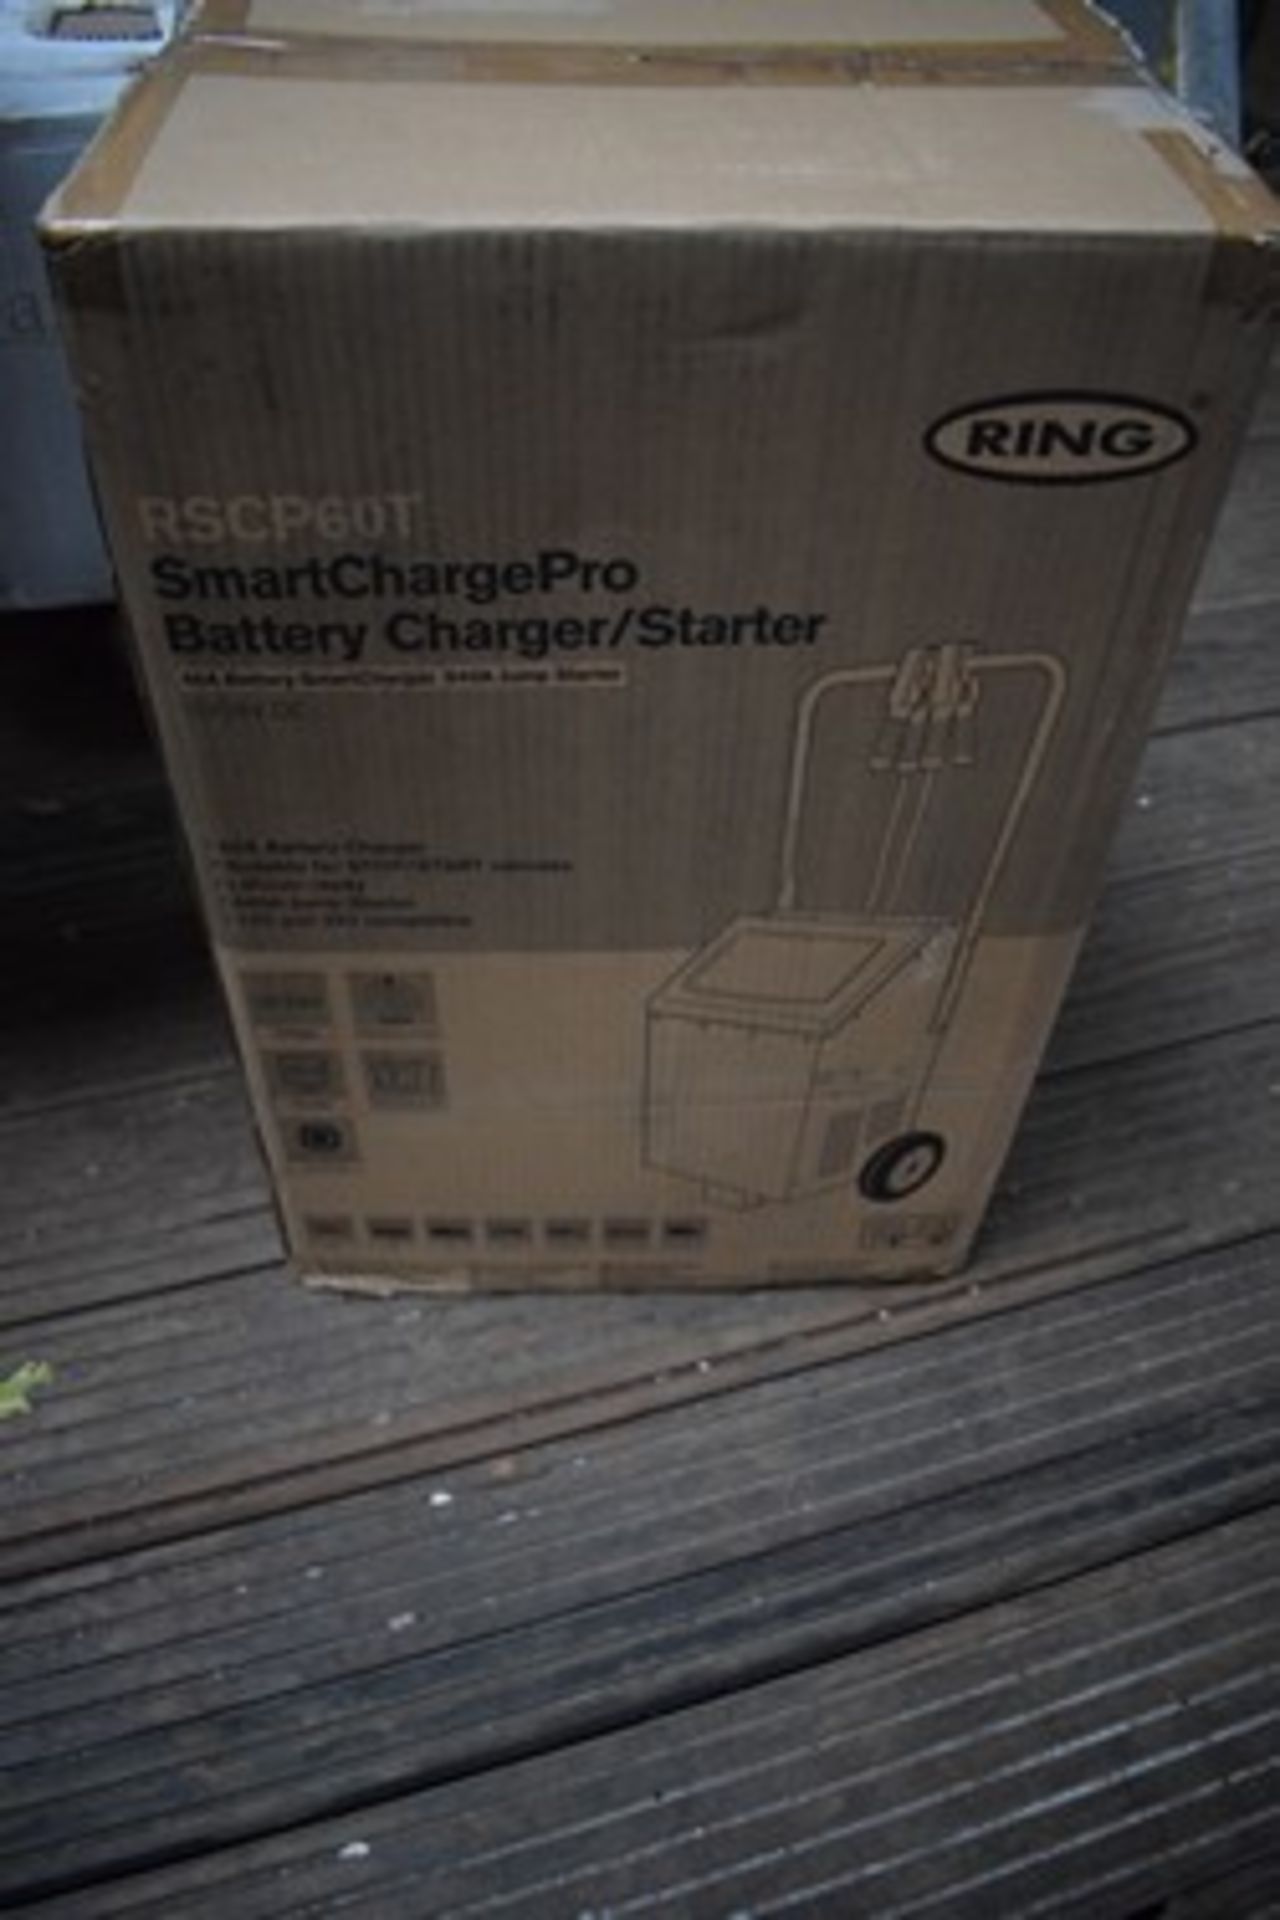 1 x Ring Smart charge pro battery charger/starter, Model RSCP60T, 12/24V DC - New in box (GS0)